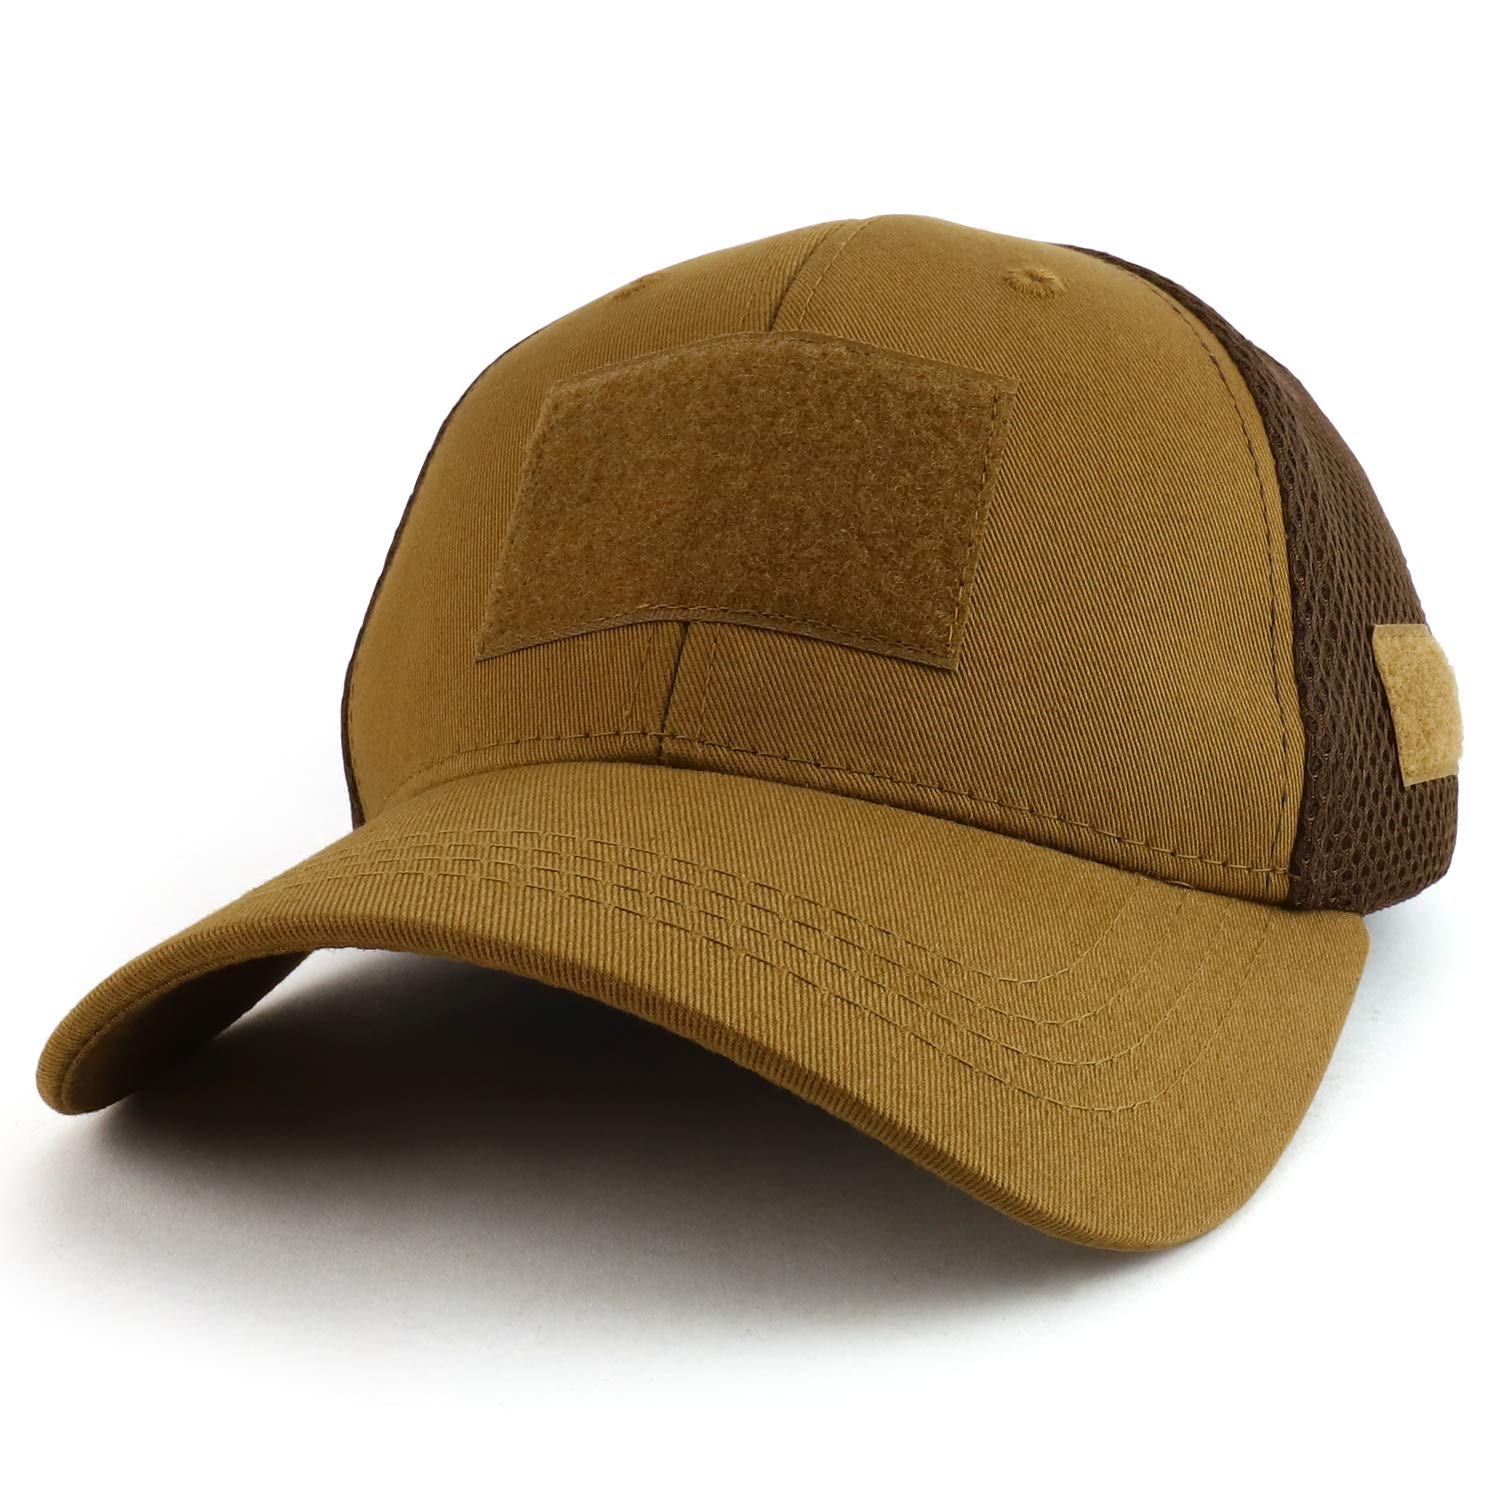 Armycrew Low Profile Air Mesh Tactical Cap with 6 Loop Patch Areas